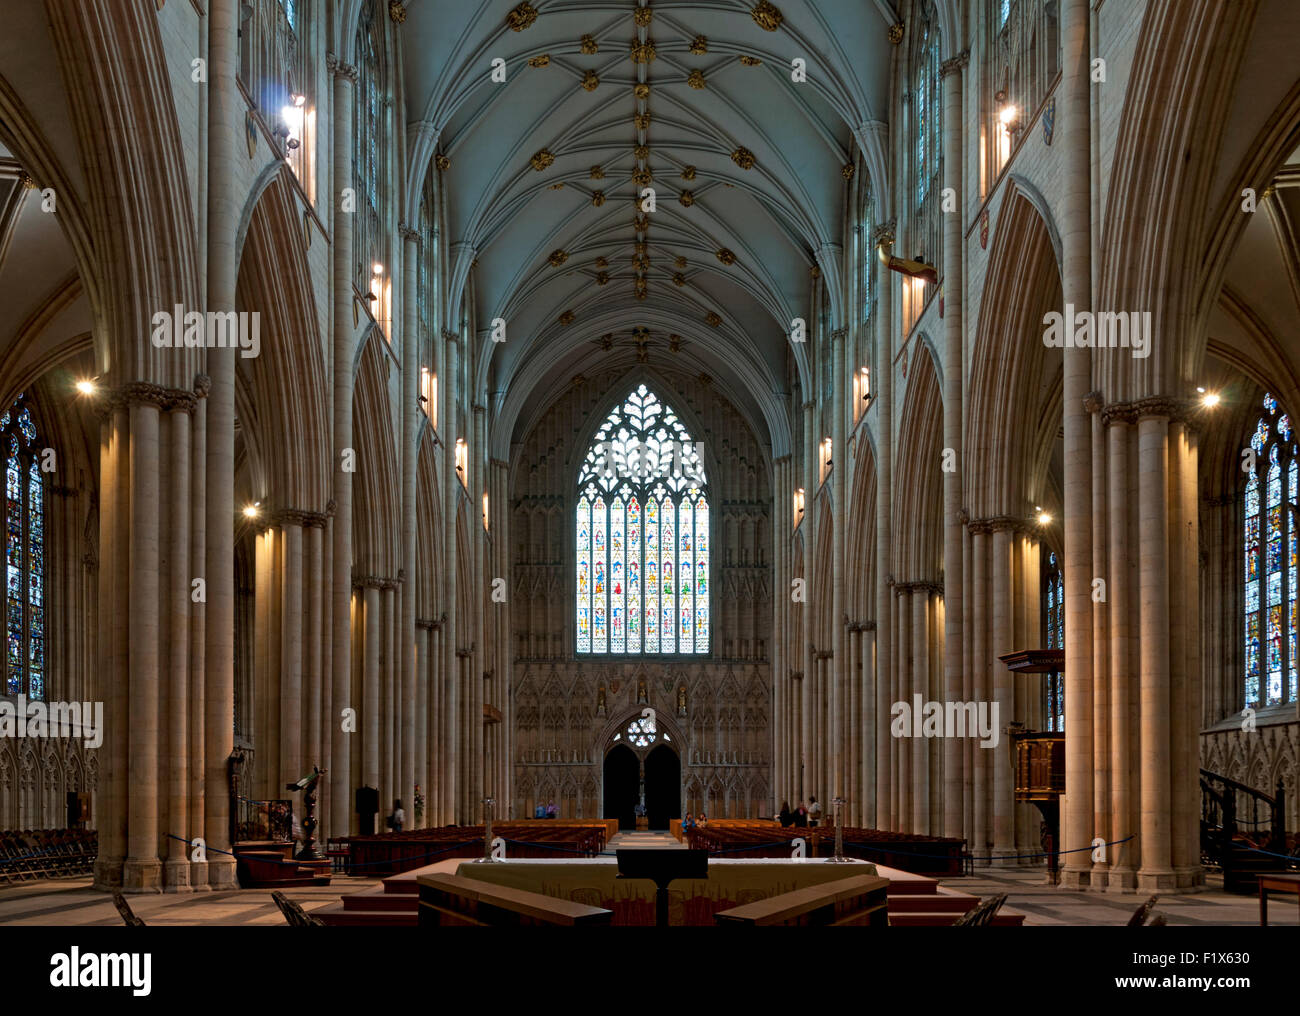 The Nave and the Great West Window of York Minster, City of York, Yorkshire, England, UK Stock Photo